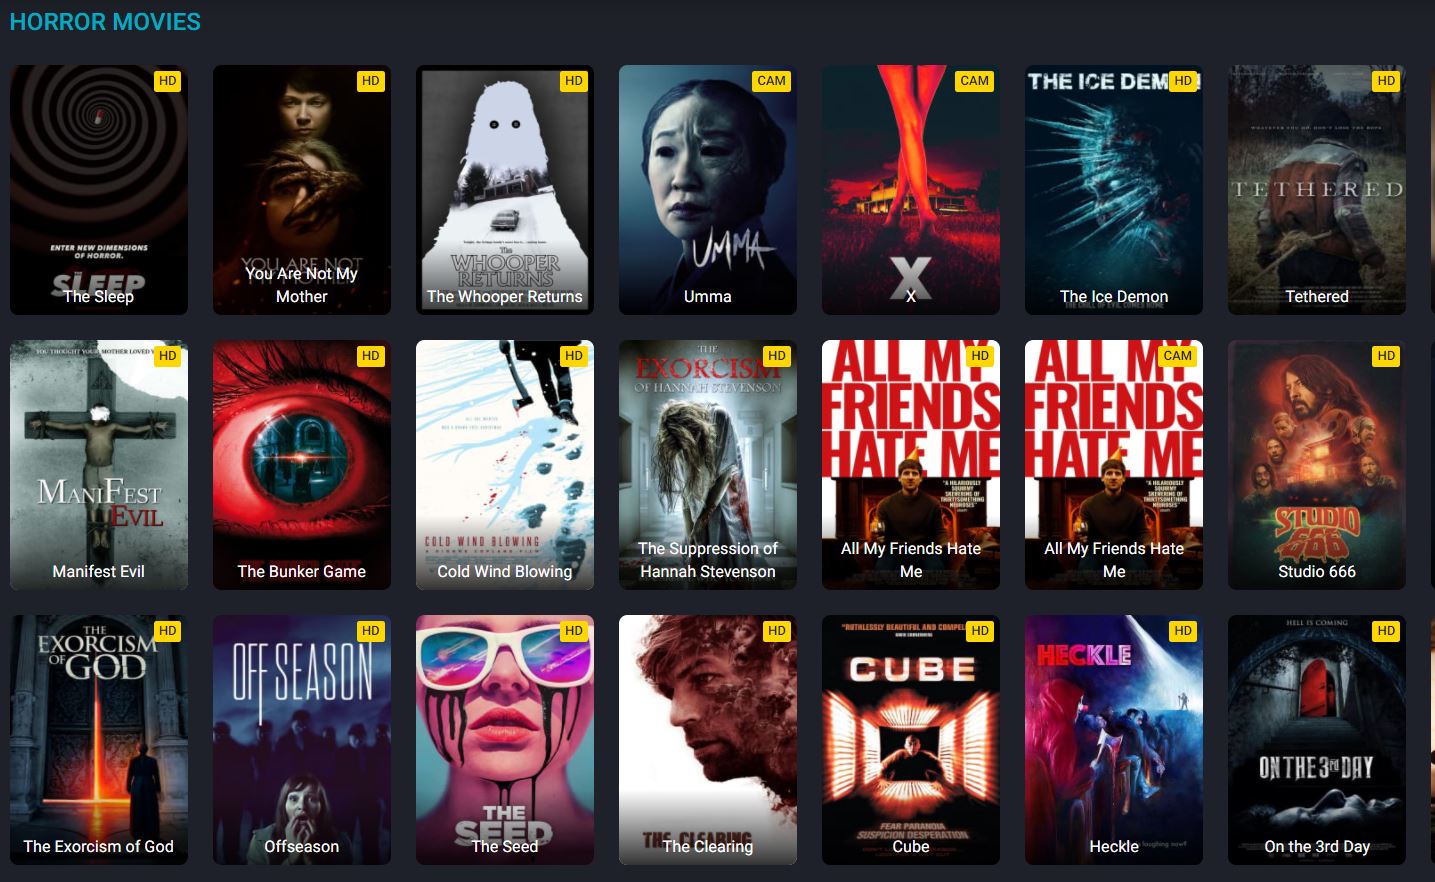 Screenshot of the horror movies collection on fmovies website